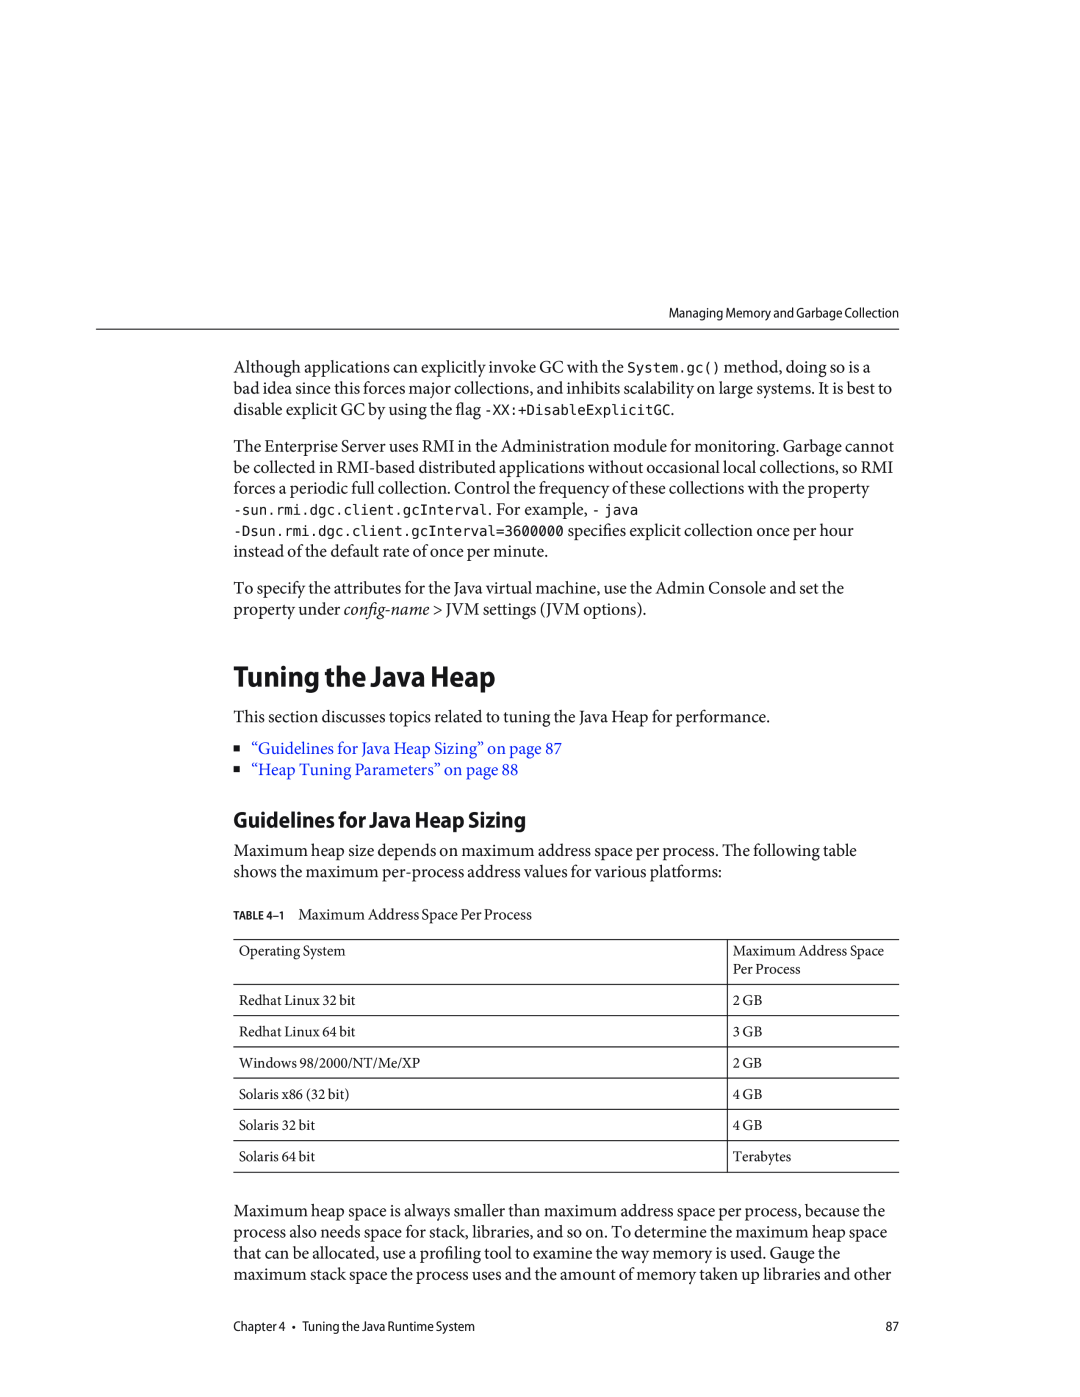 Sun Microsystems 820434310 manual Tuning the Java Heap, Guidelines for Java Heap Sizing, “Heap Tuning Parameters” on page 